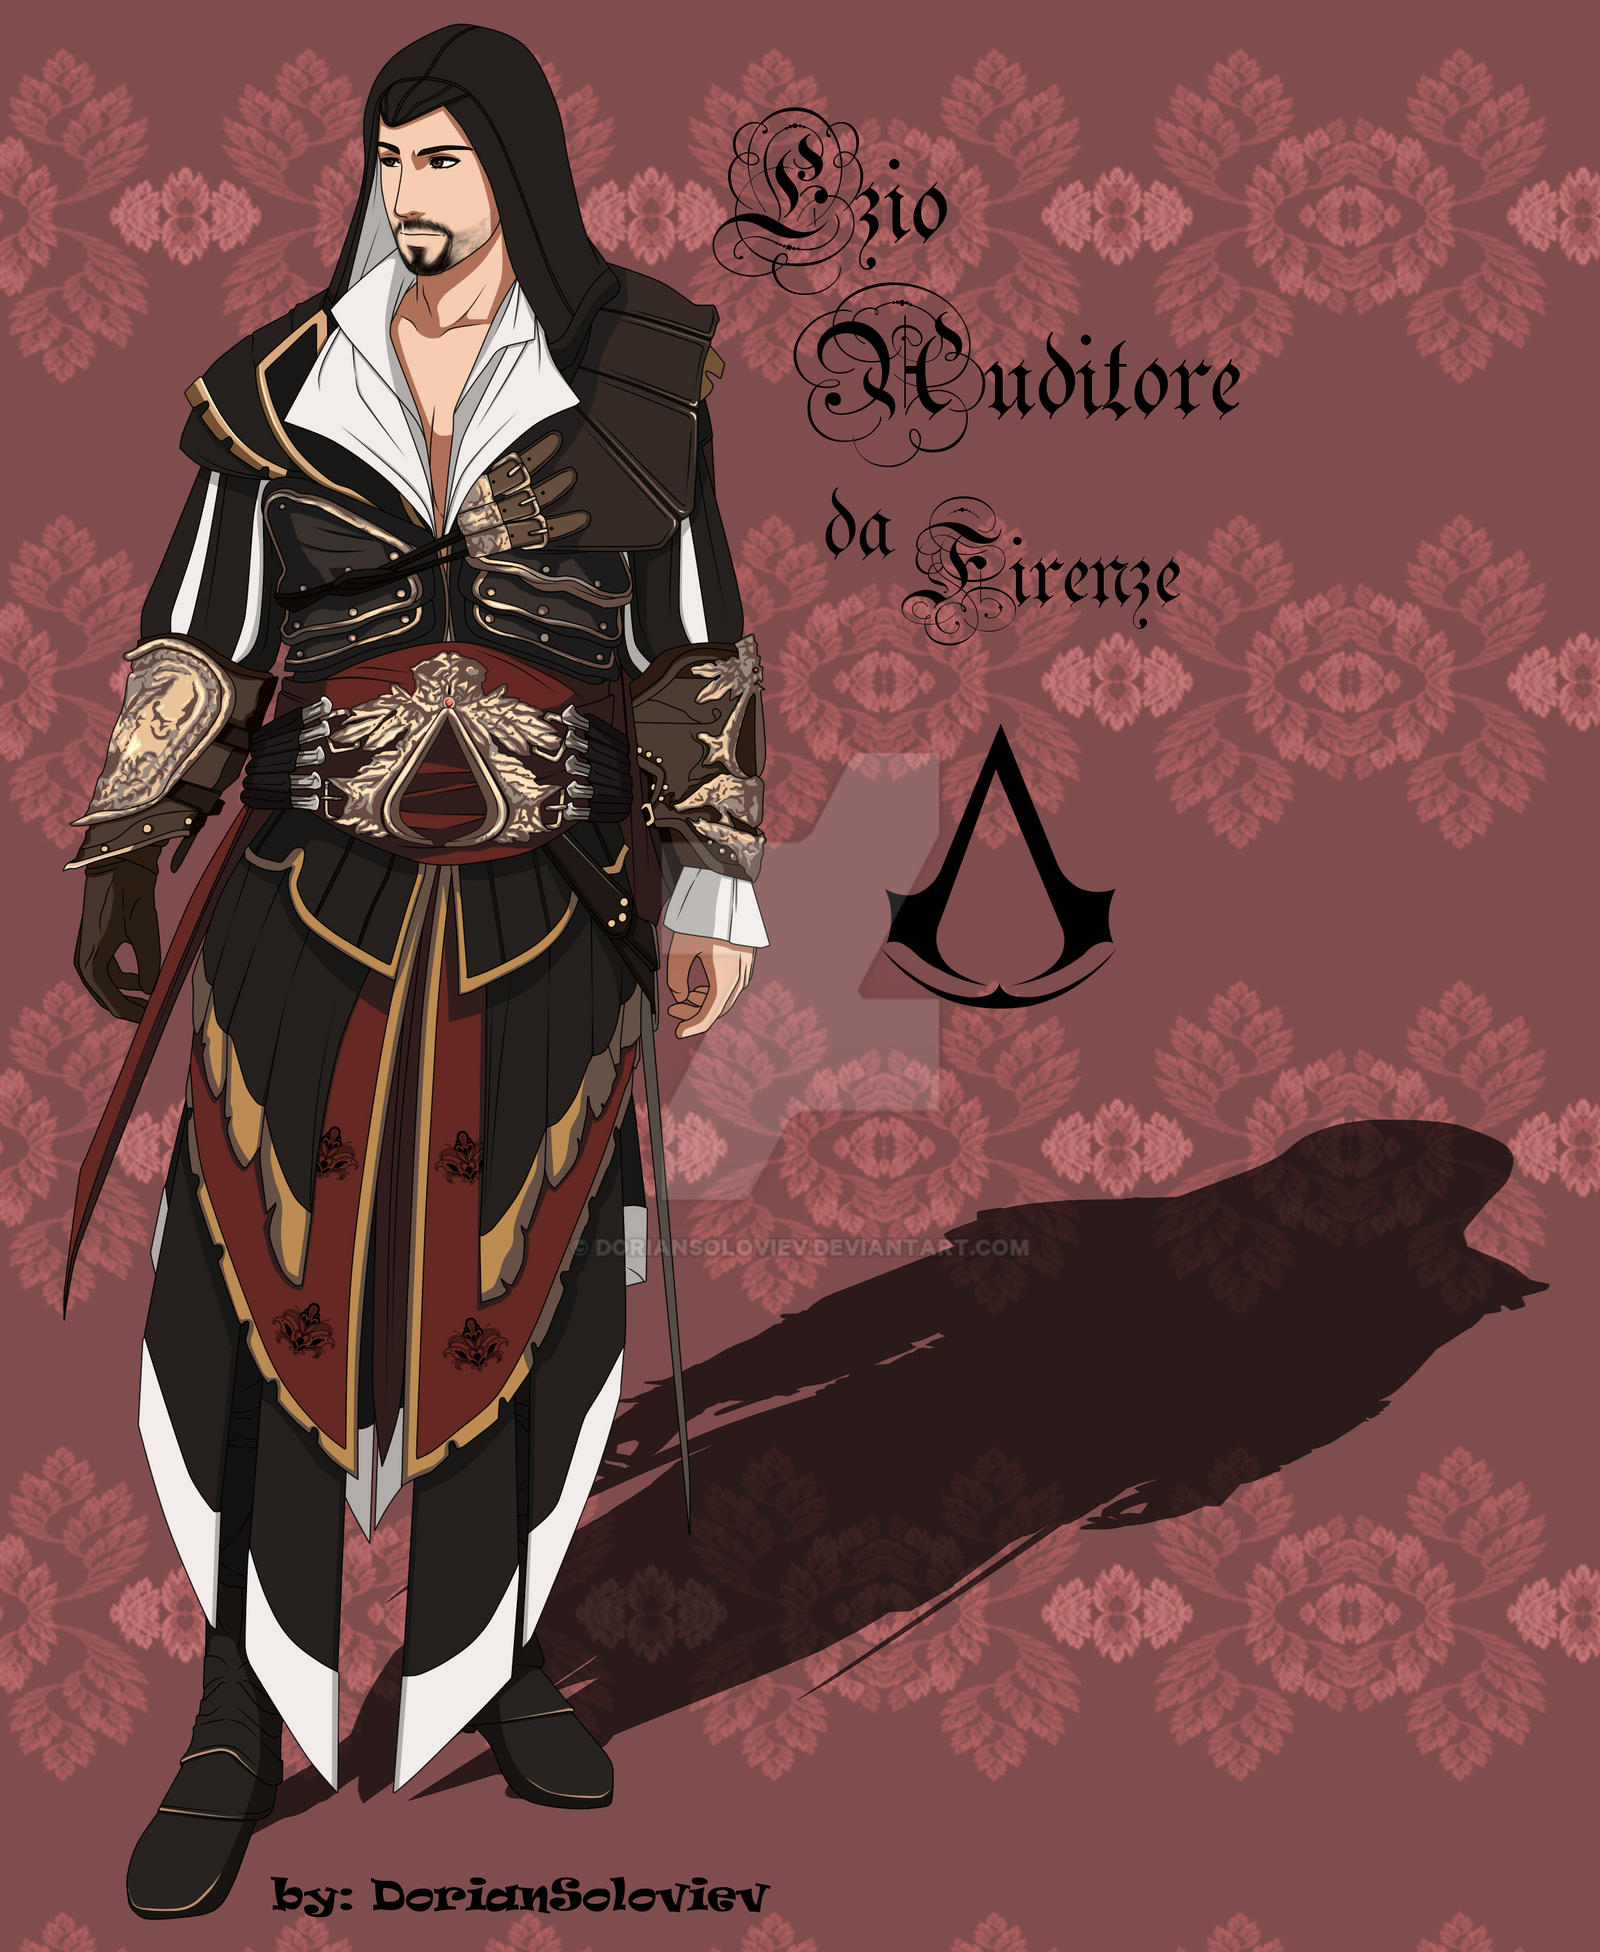 Assassins Creed red coat (clothed version) by elcarlo42 on DeviantArt